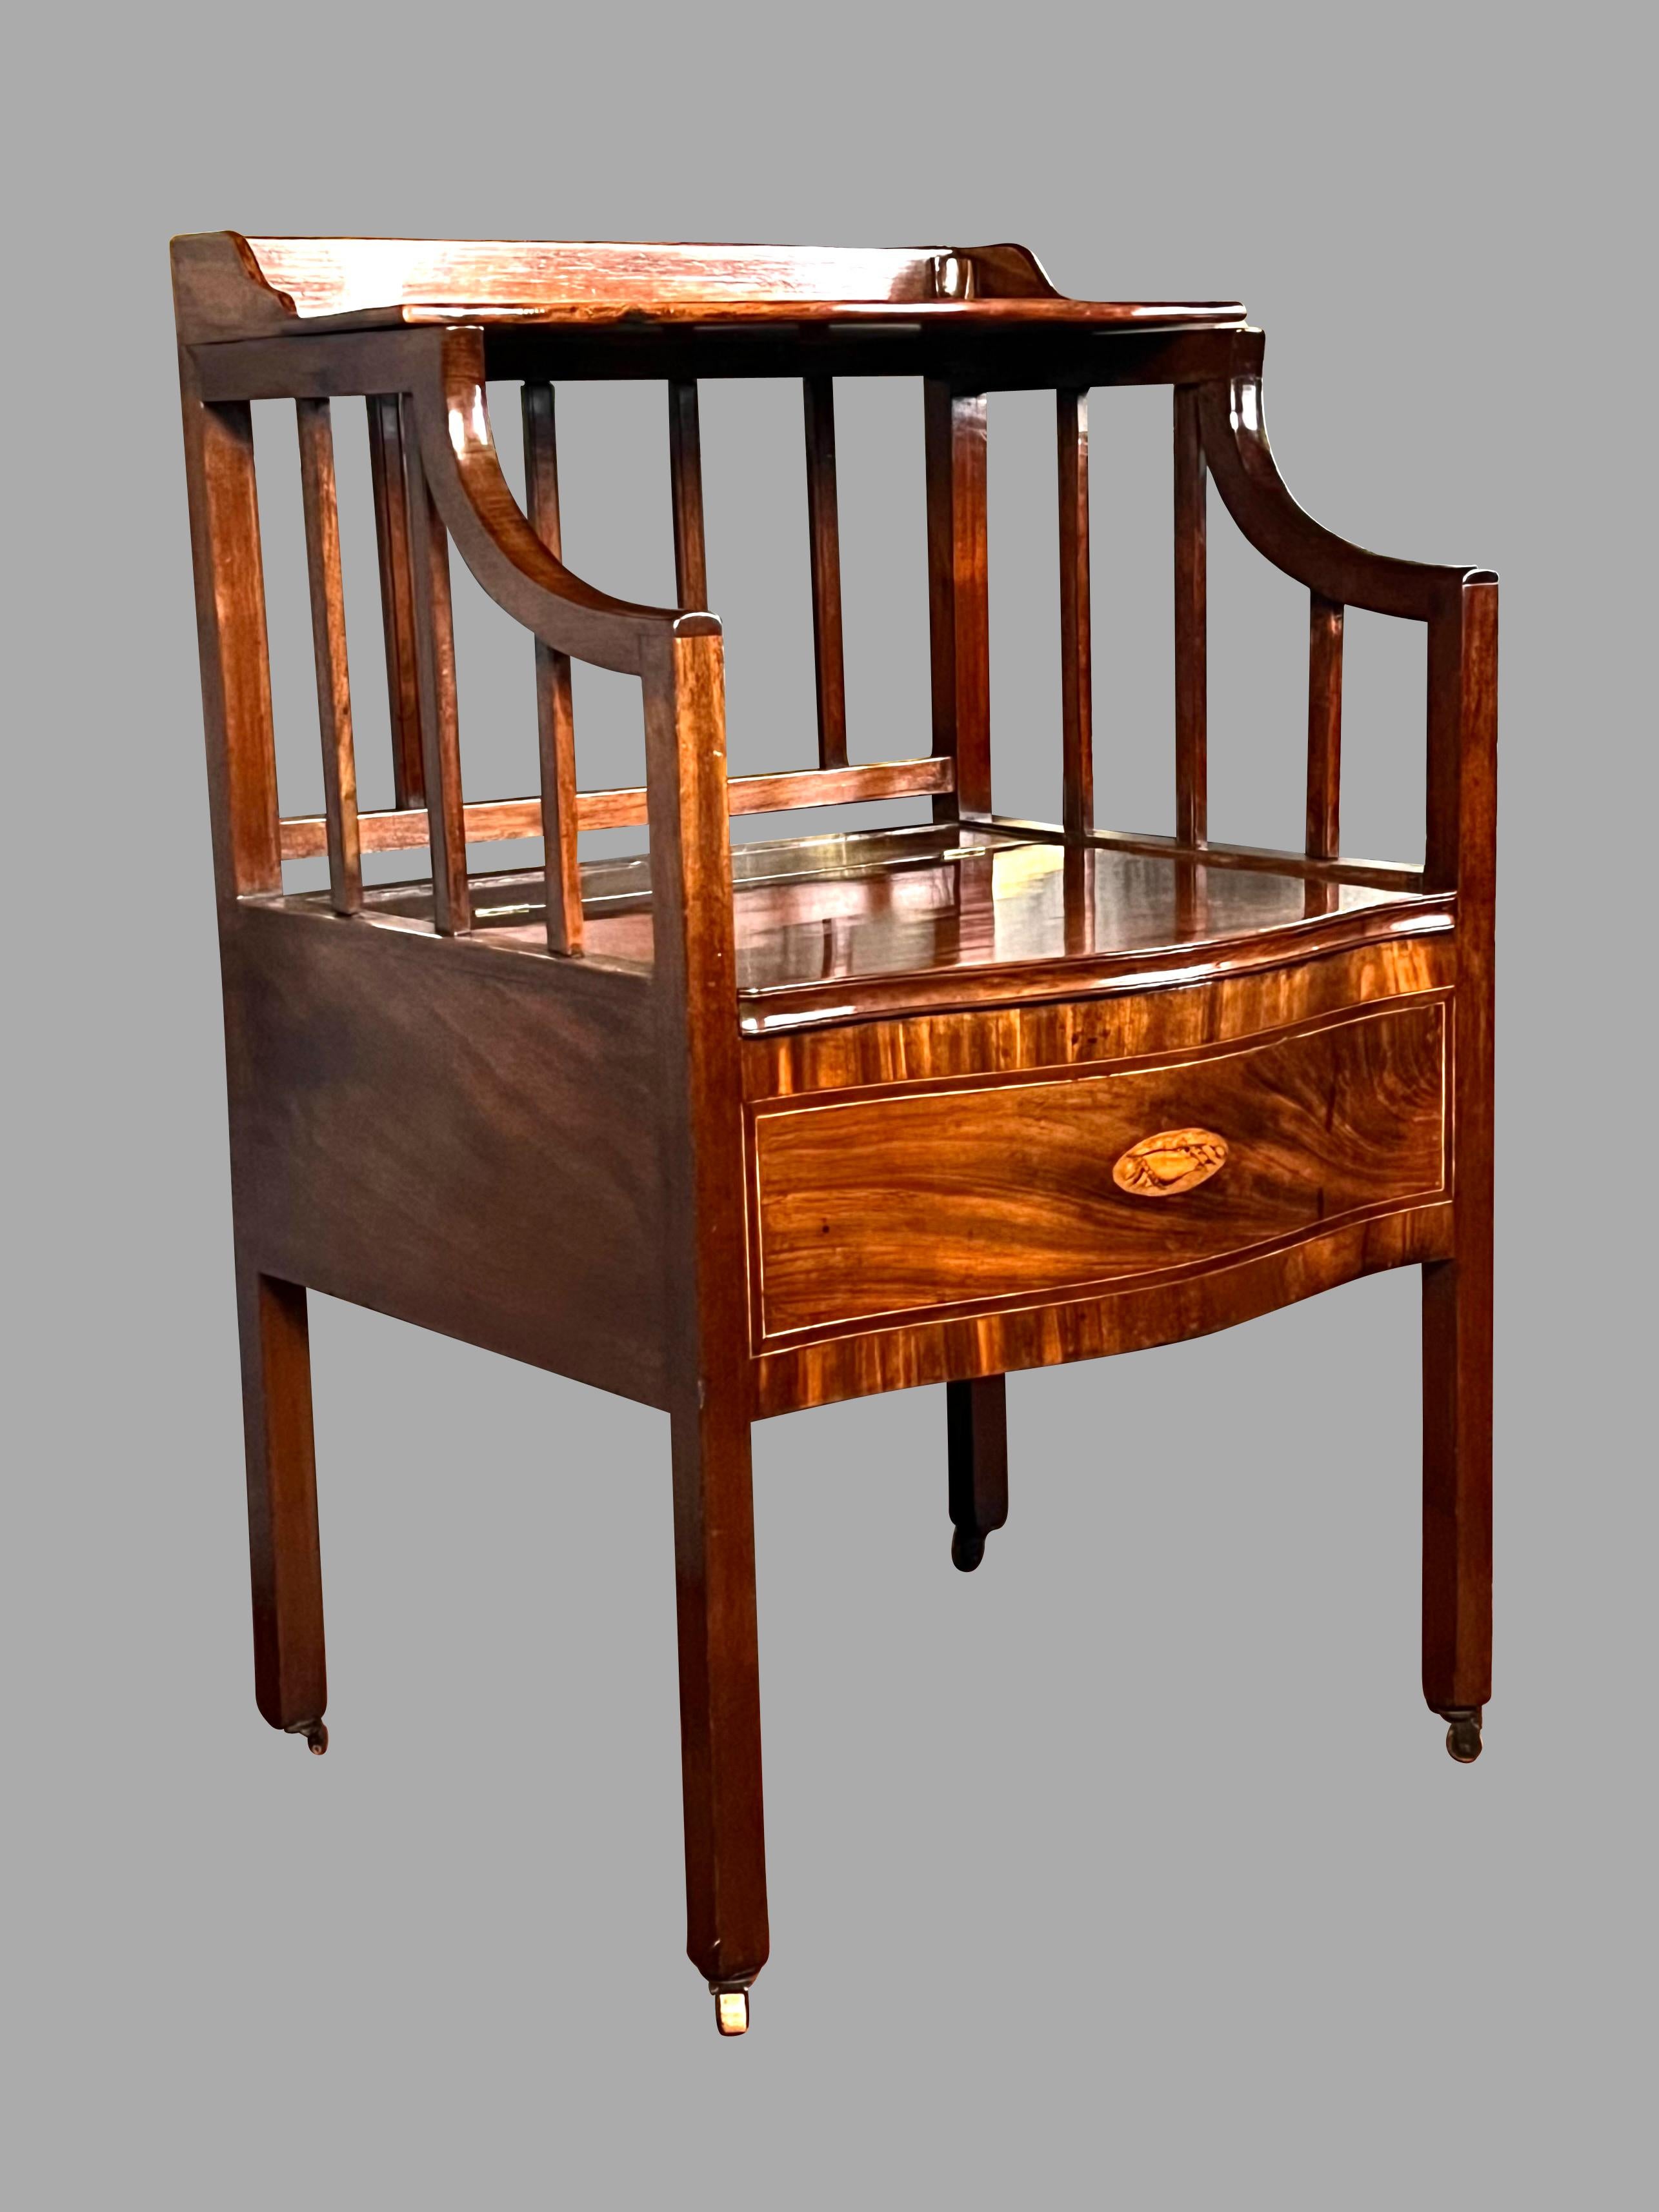 English George III Period Inlaid Mahogany Serpentine Form Bedside Commode For Sale 2